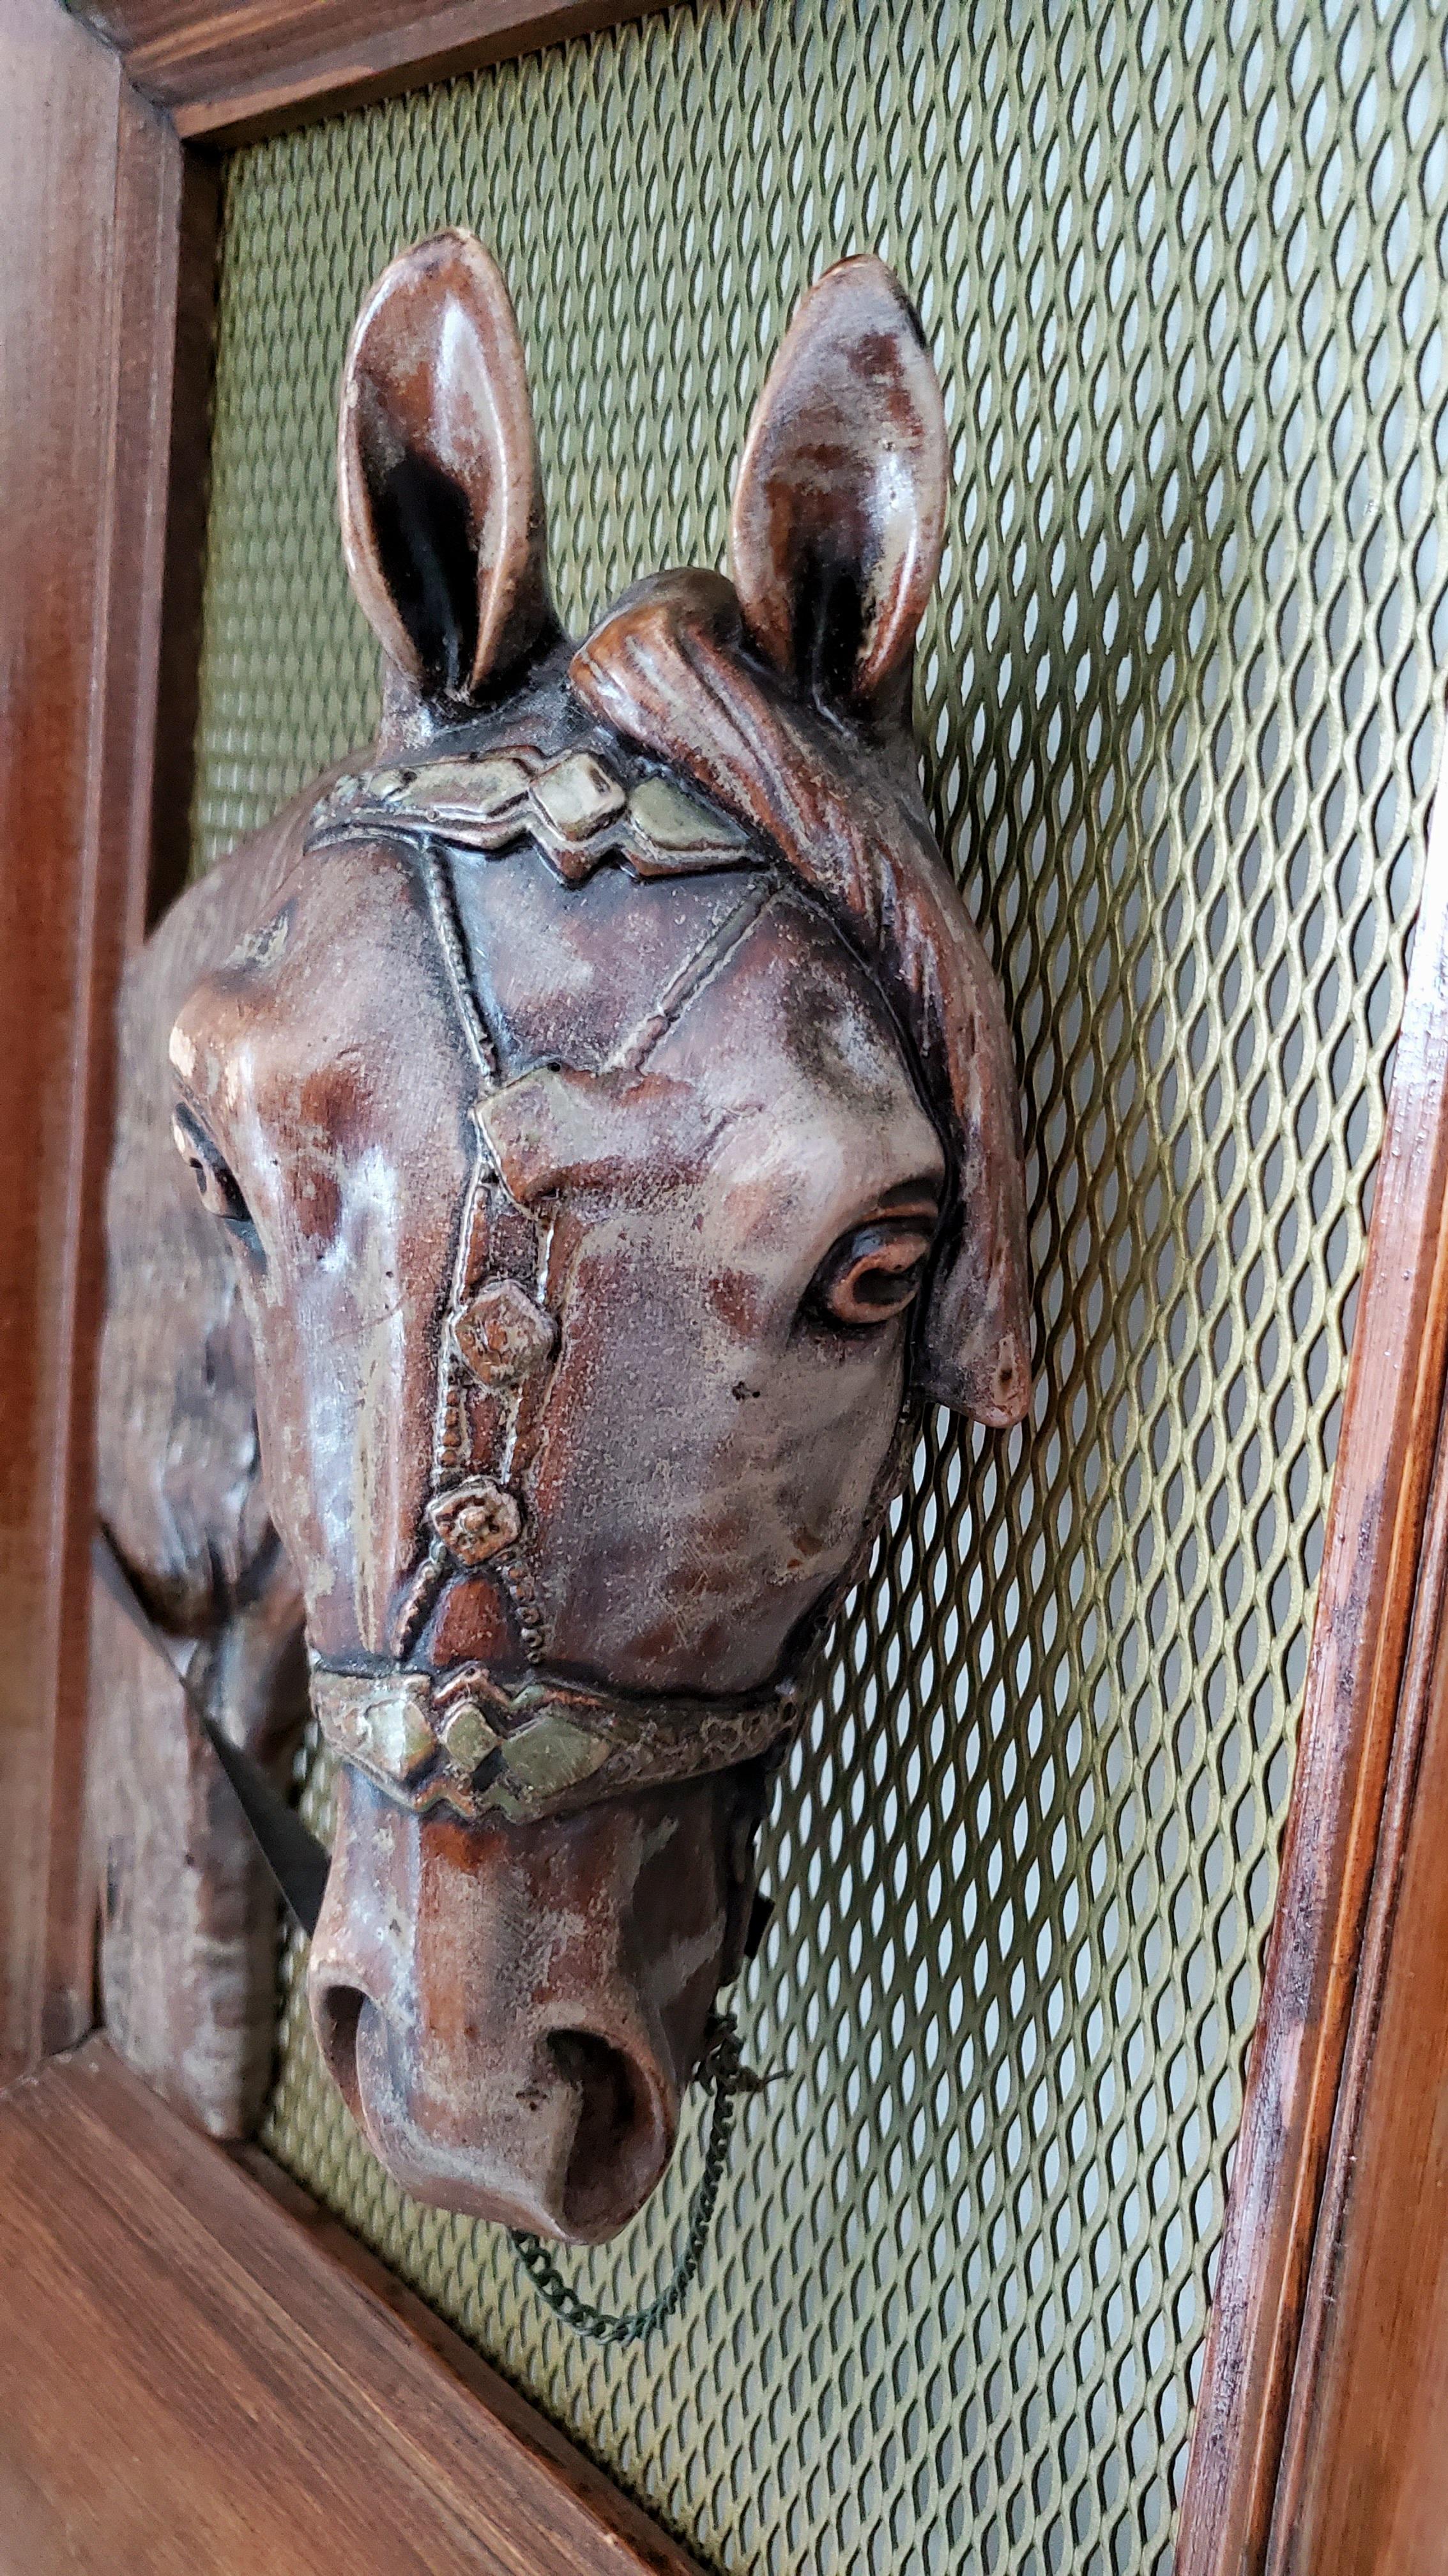 American Craftsman Antique Horse Sculpture  Framed Copper Horse Head in Relief For Sale